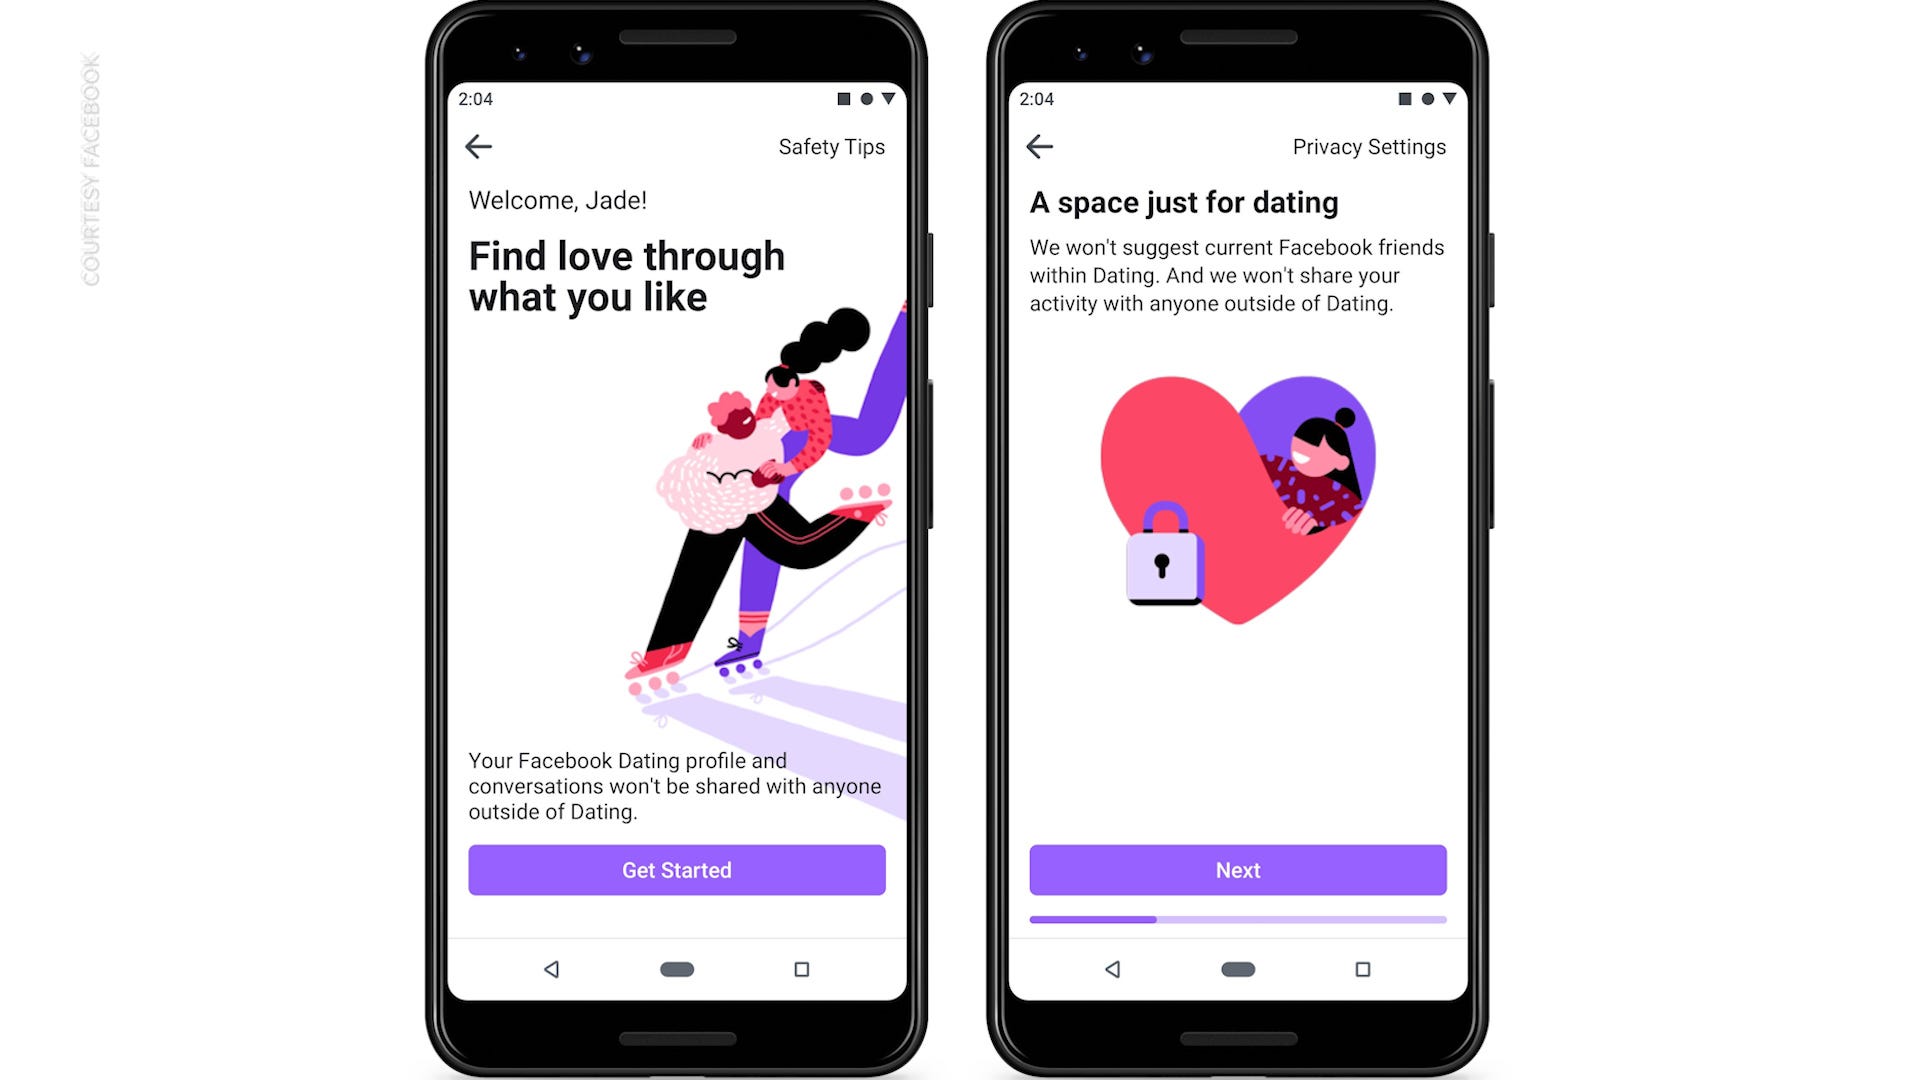 Calling all Facebook singles, you can now find a match with Facebook Dating